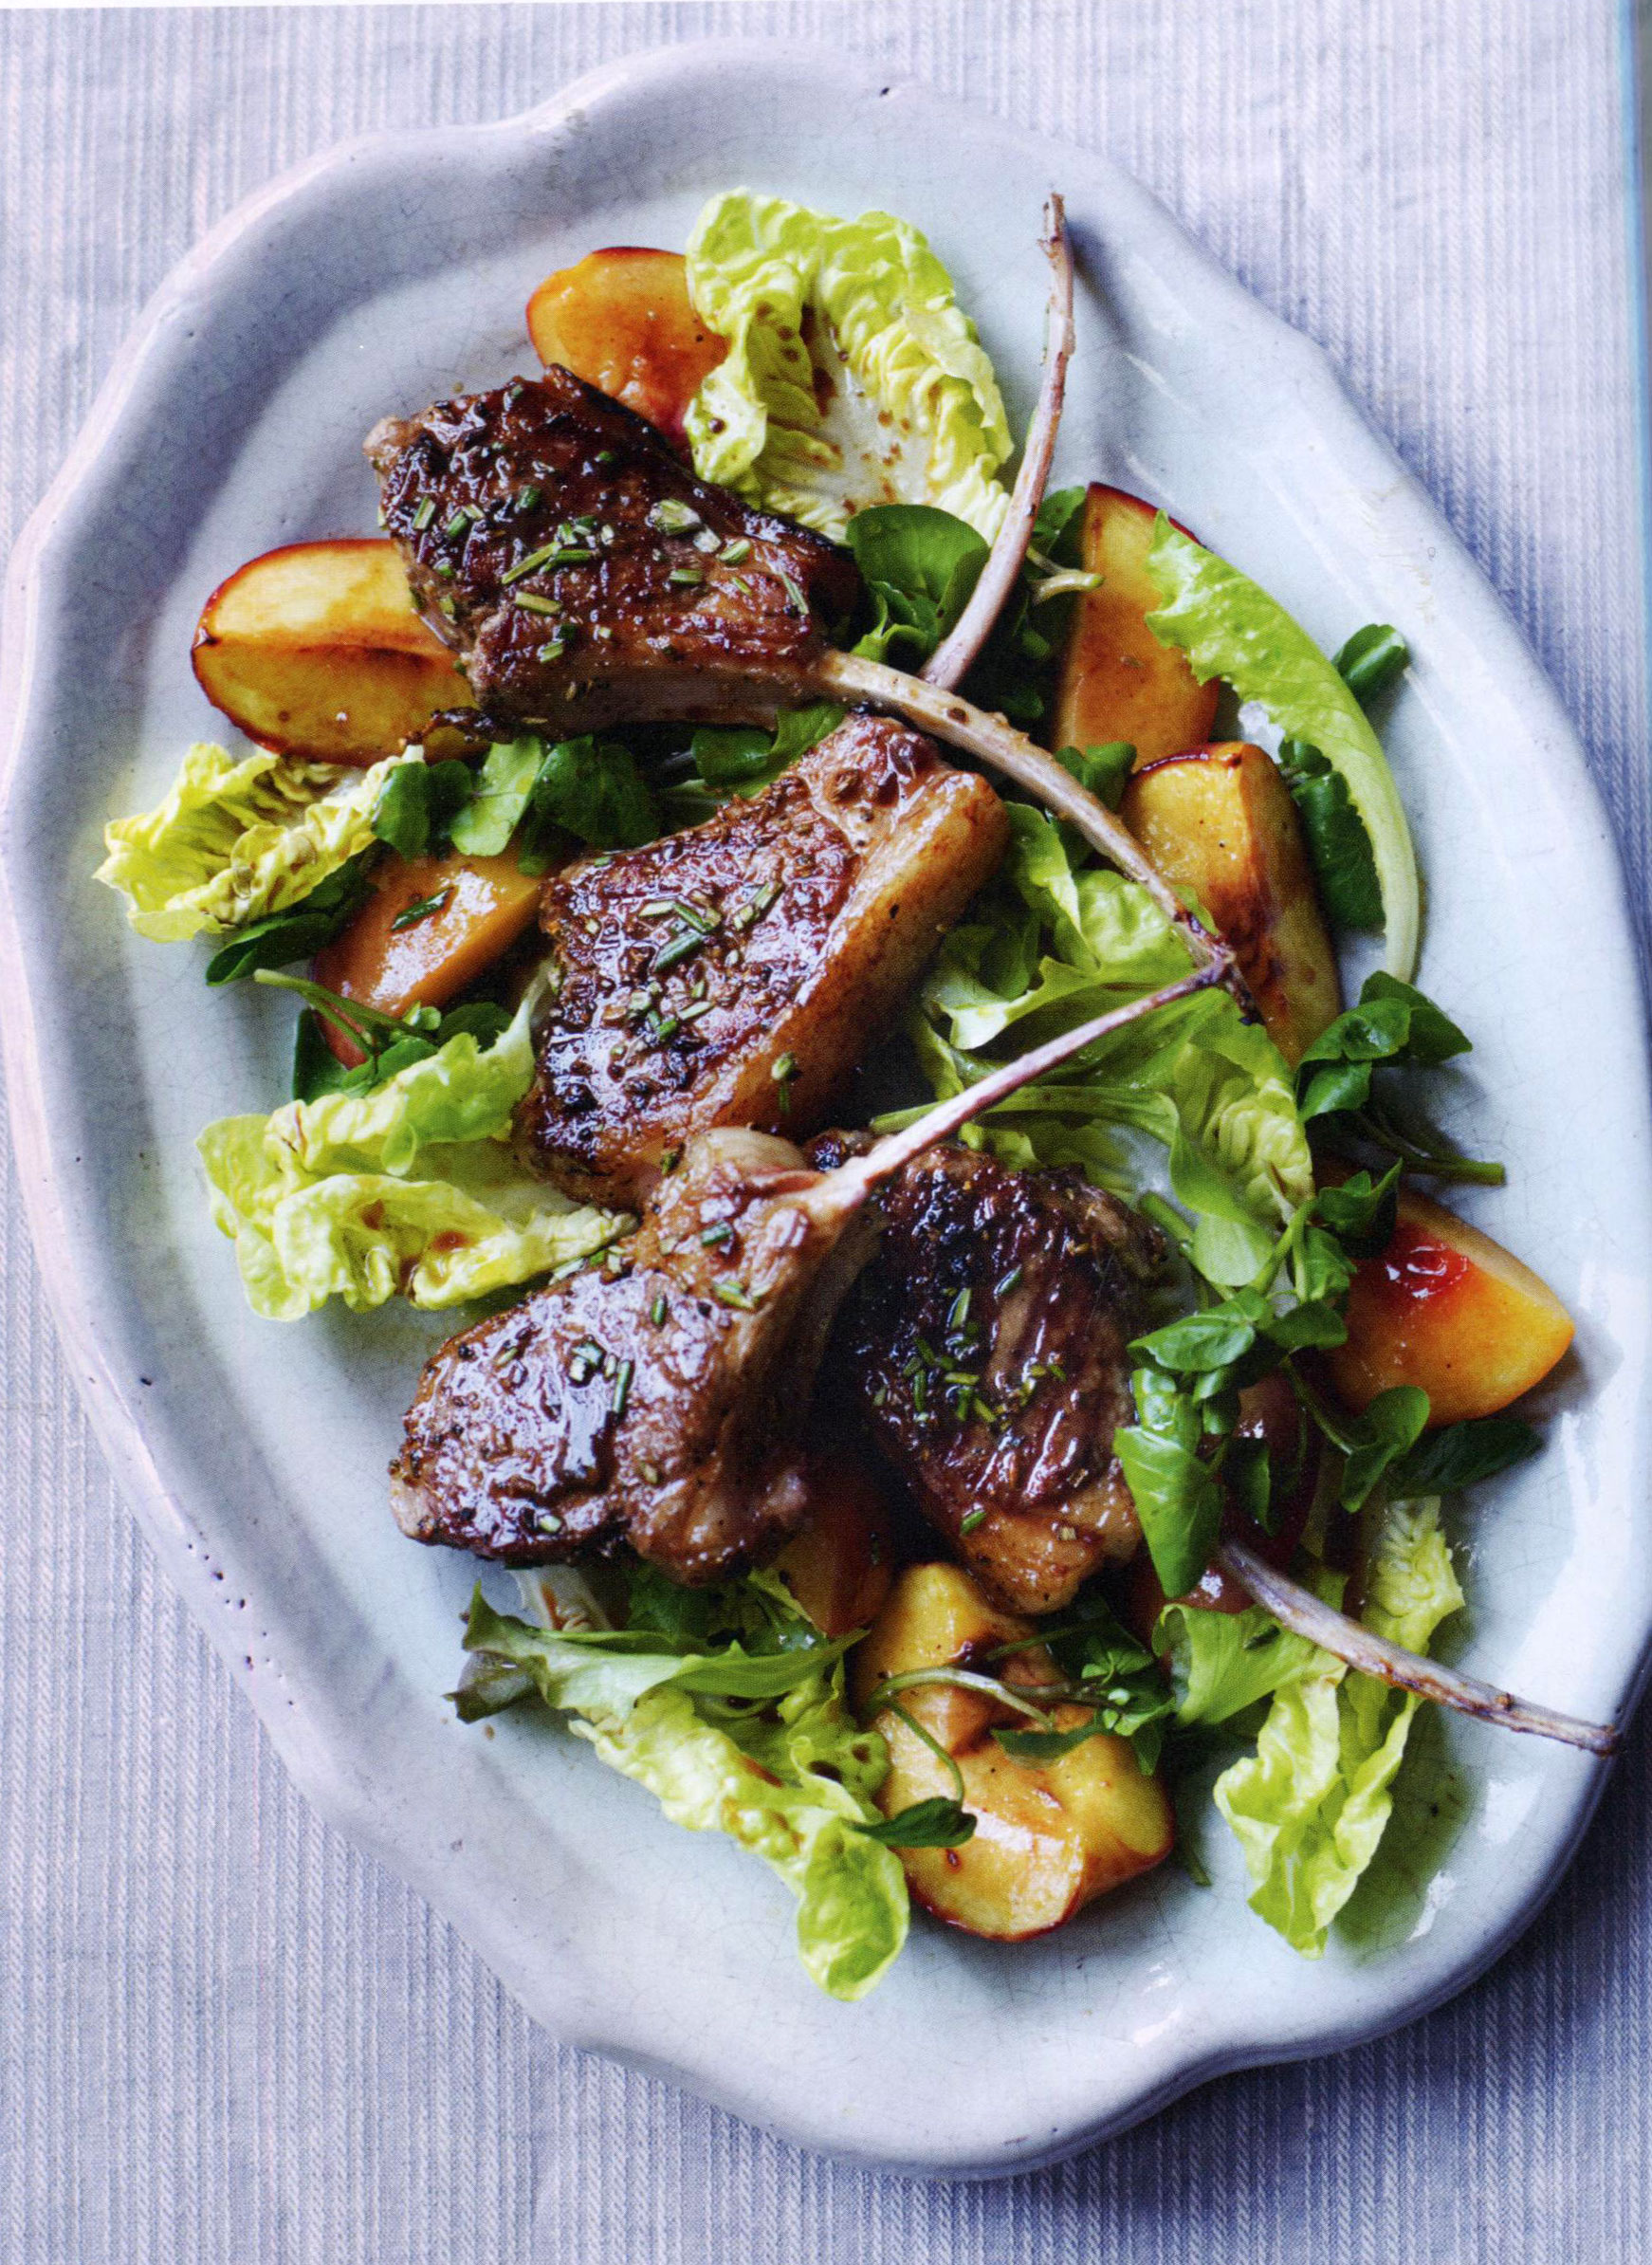 TBT Recipe: Summer Lamb with Fennel and Roasted Nectarines